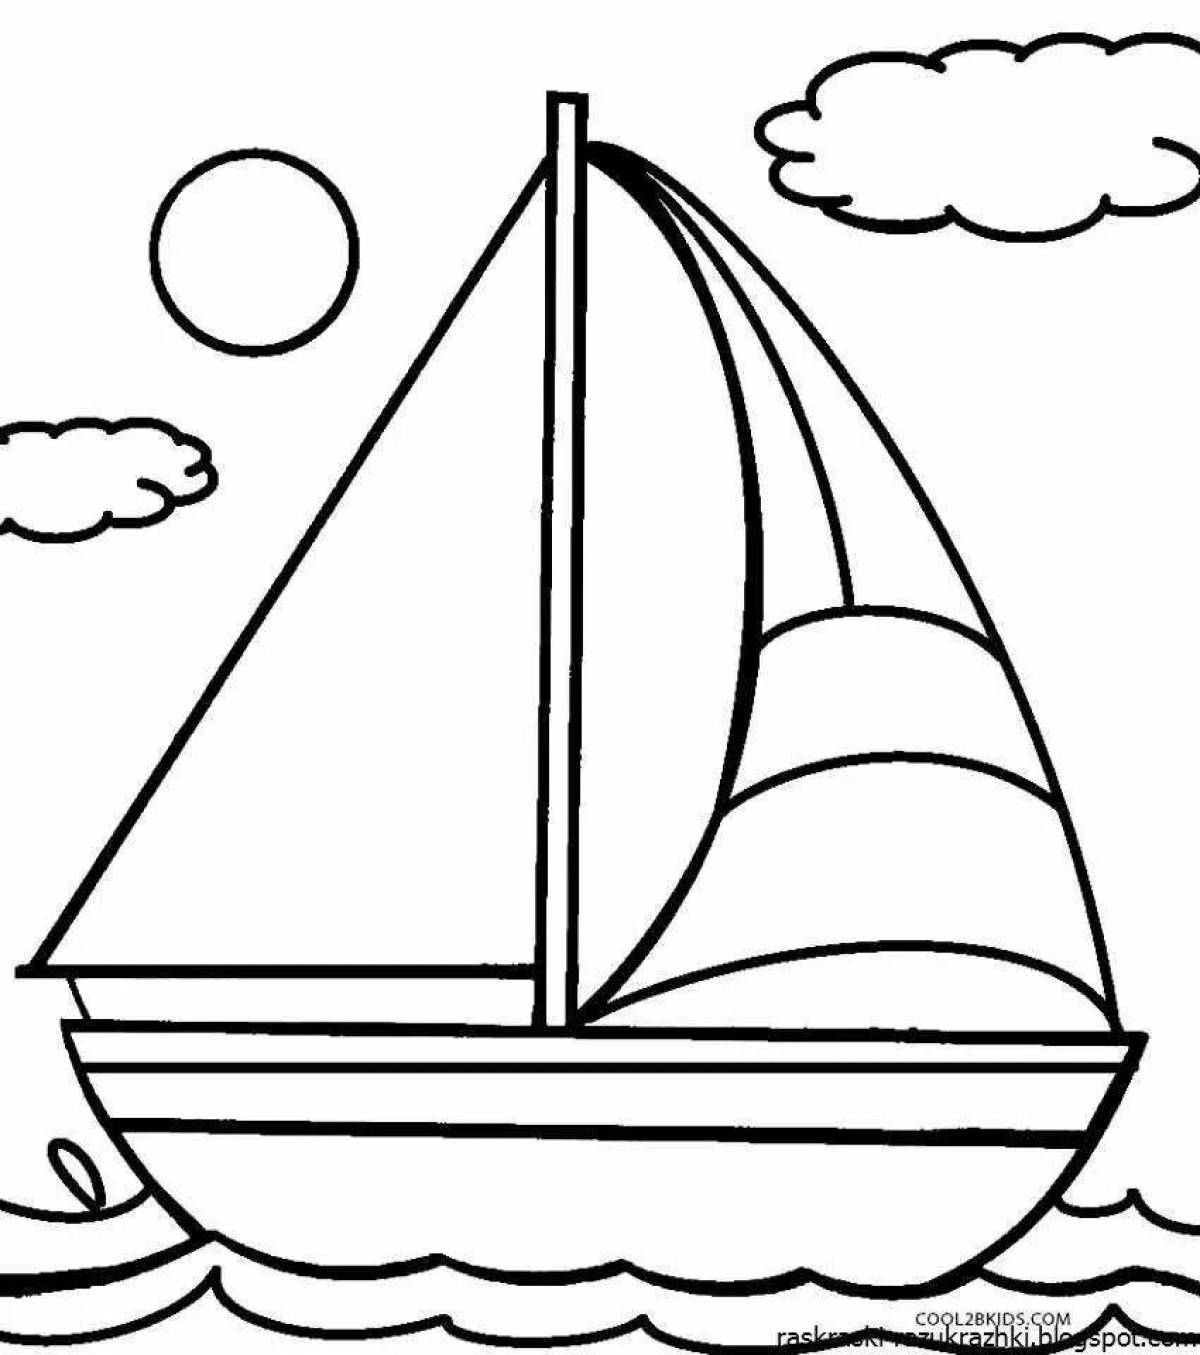 Attractive boat coloring book for 6-7 year olds